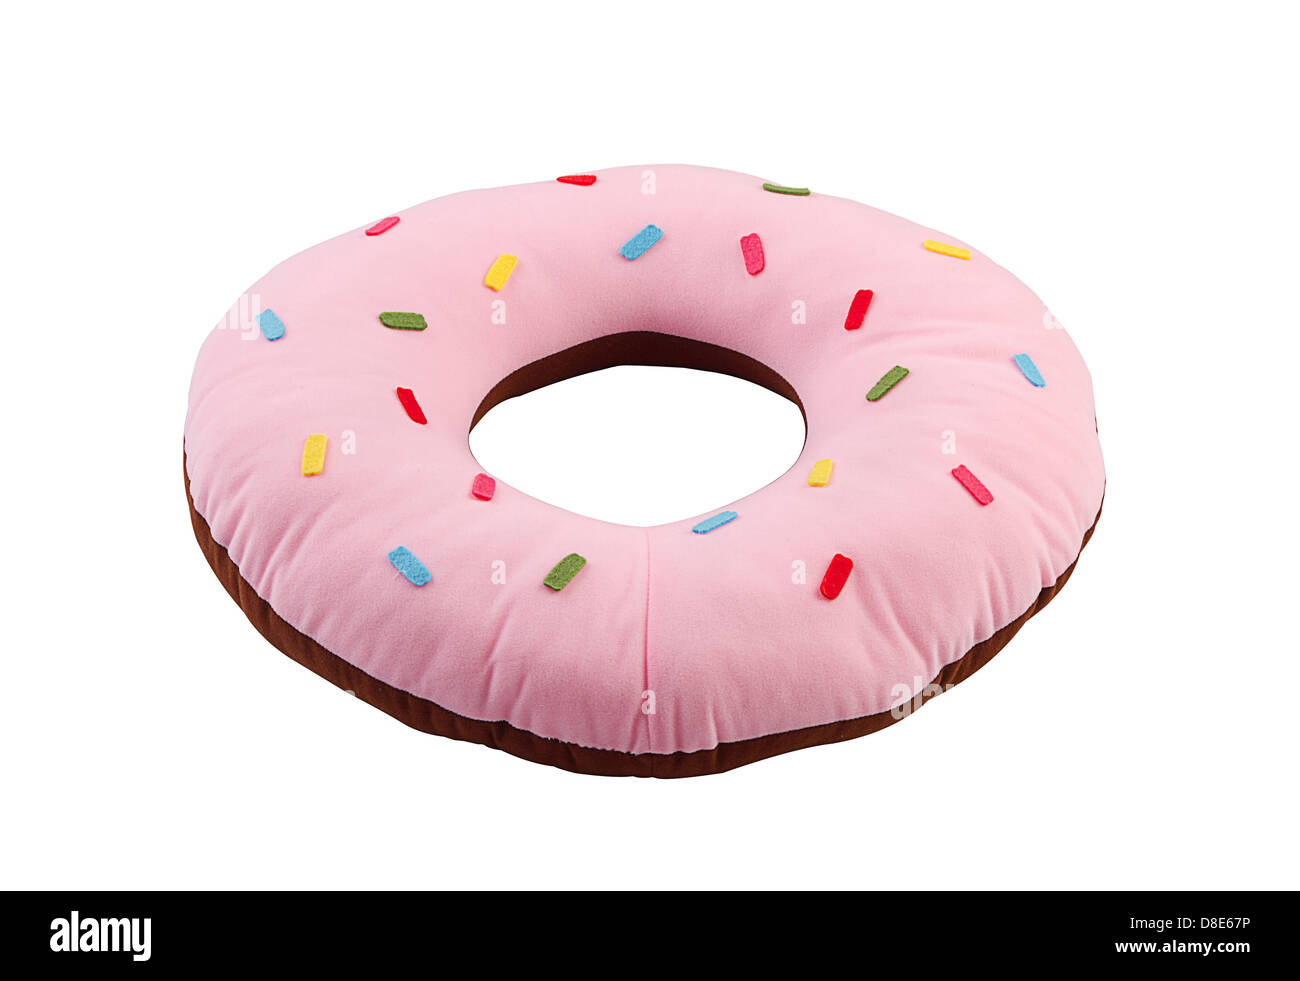 A cute cushion design in donut shape for home decoration Stock Photo